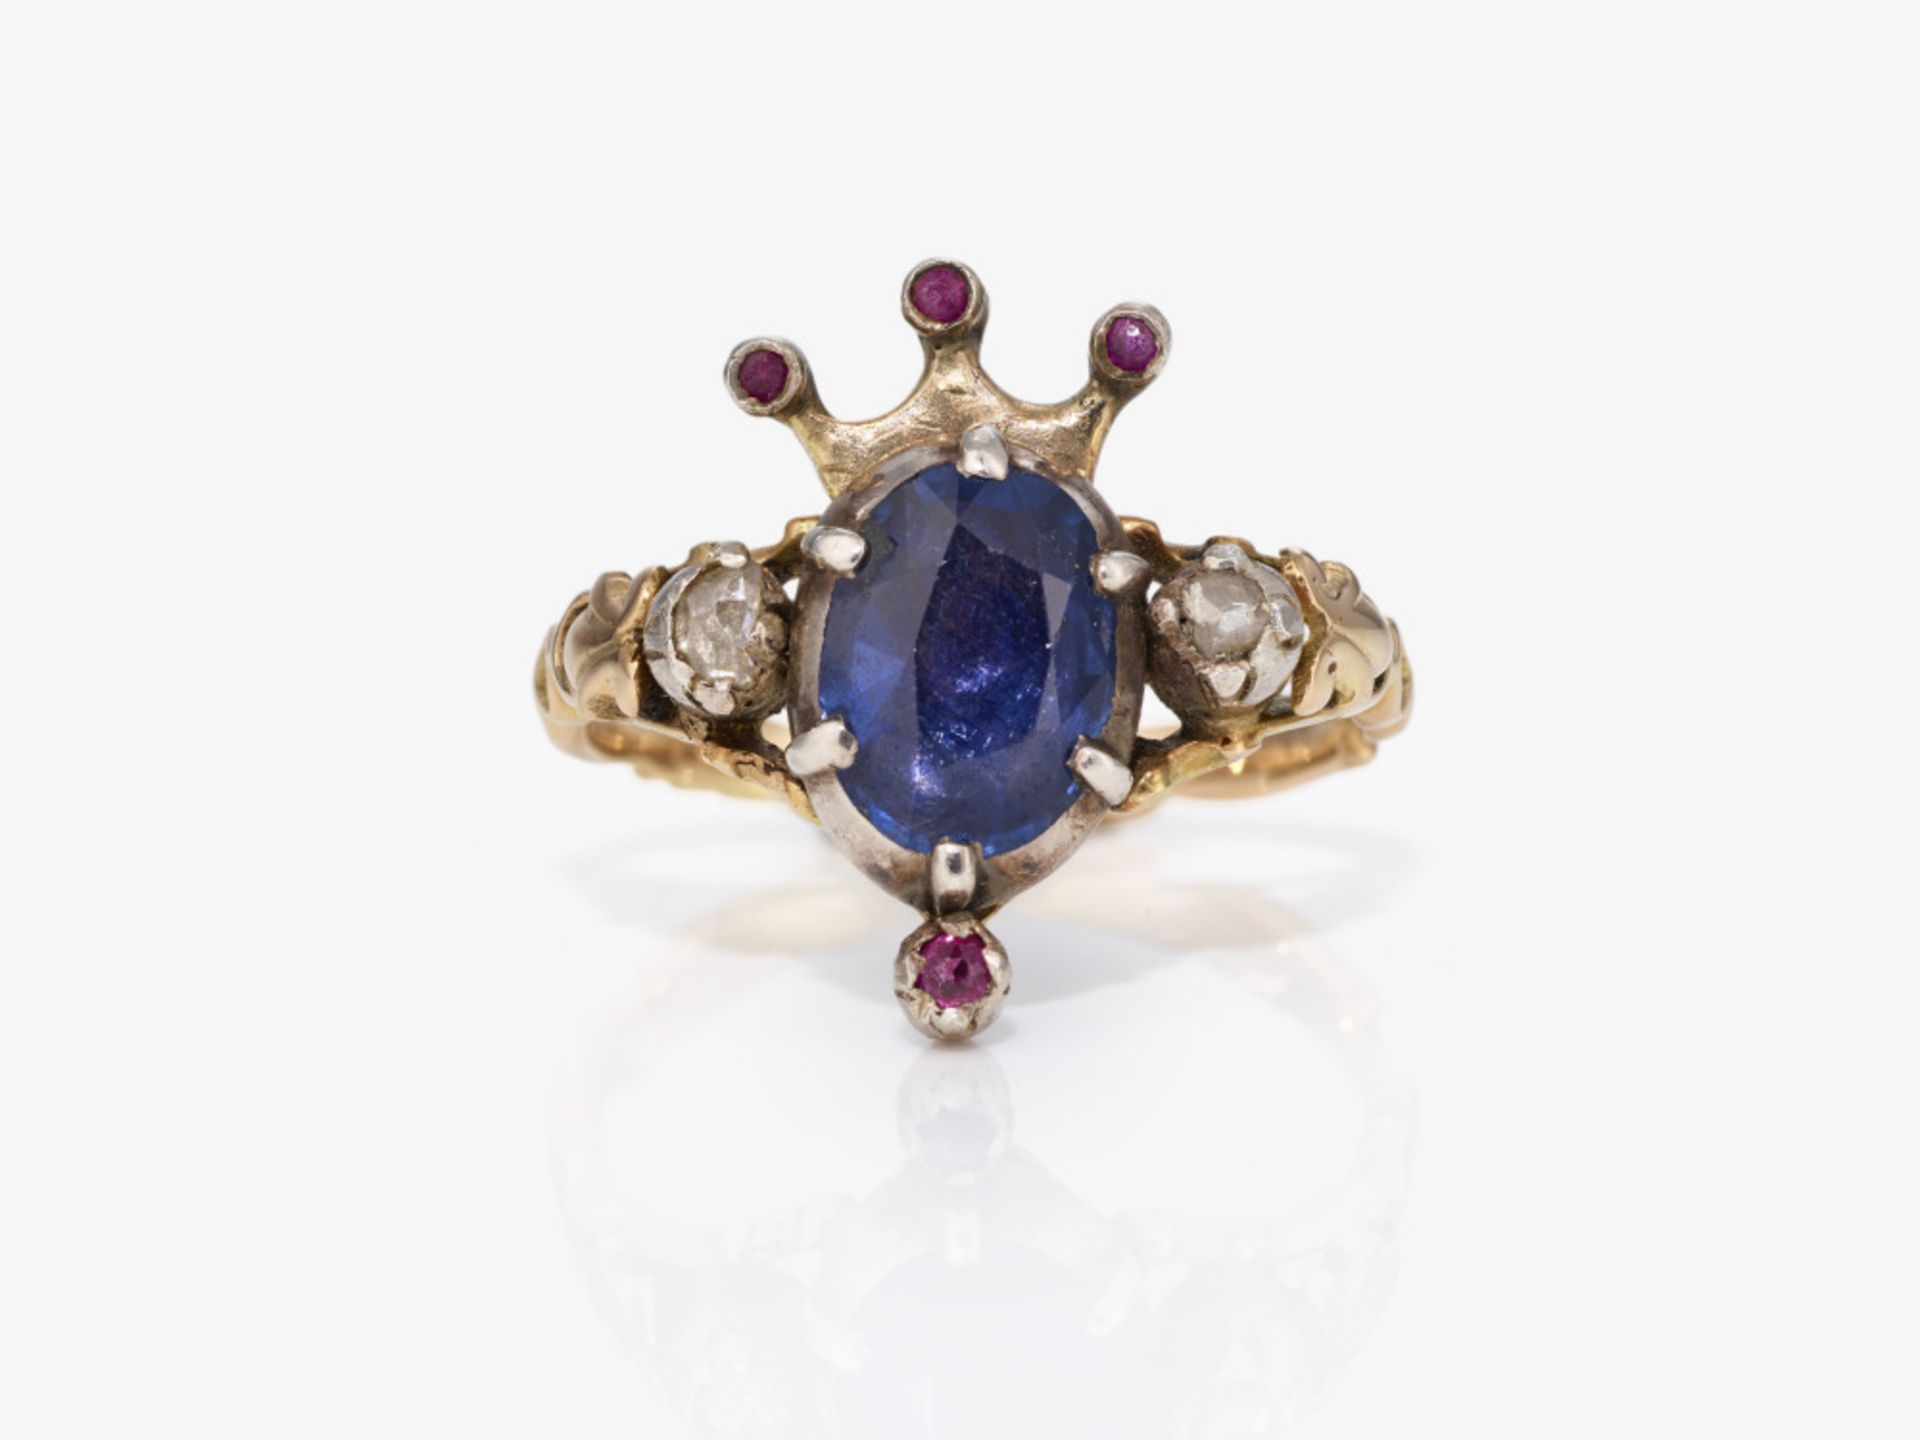 A ring with a sapphire, diamonds and rubies - Probably France, circa 1750-1770 - Image 2 of 2